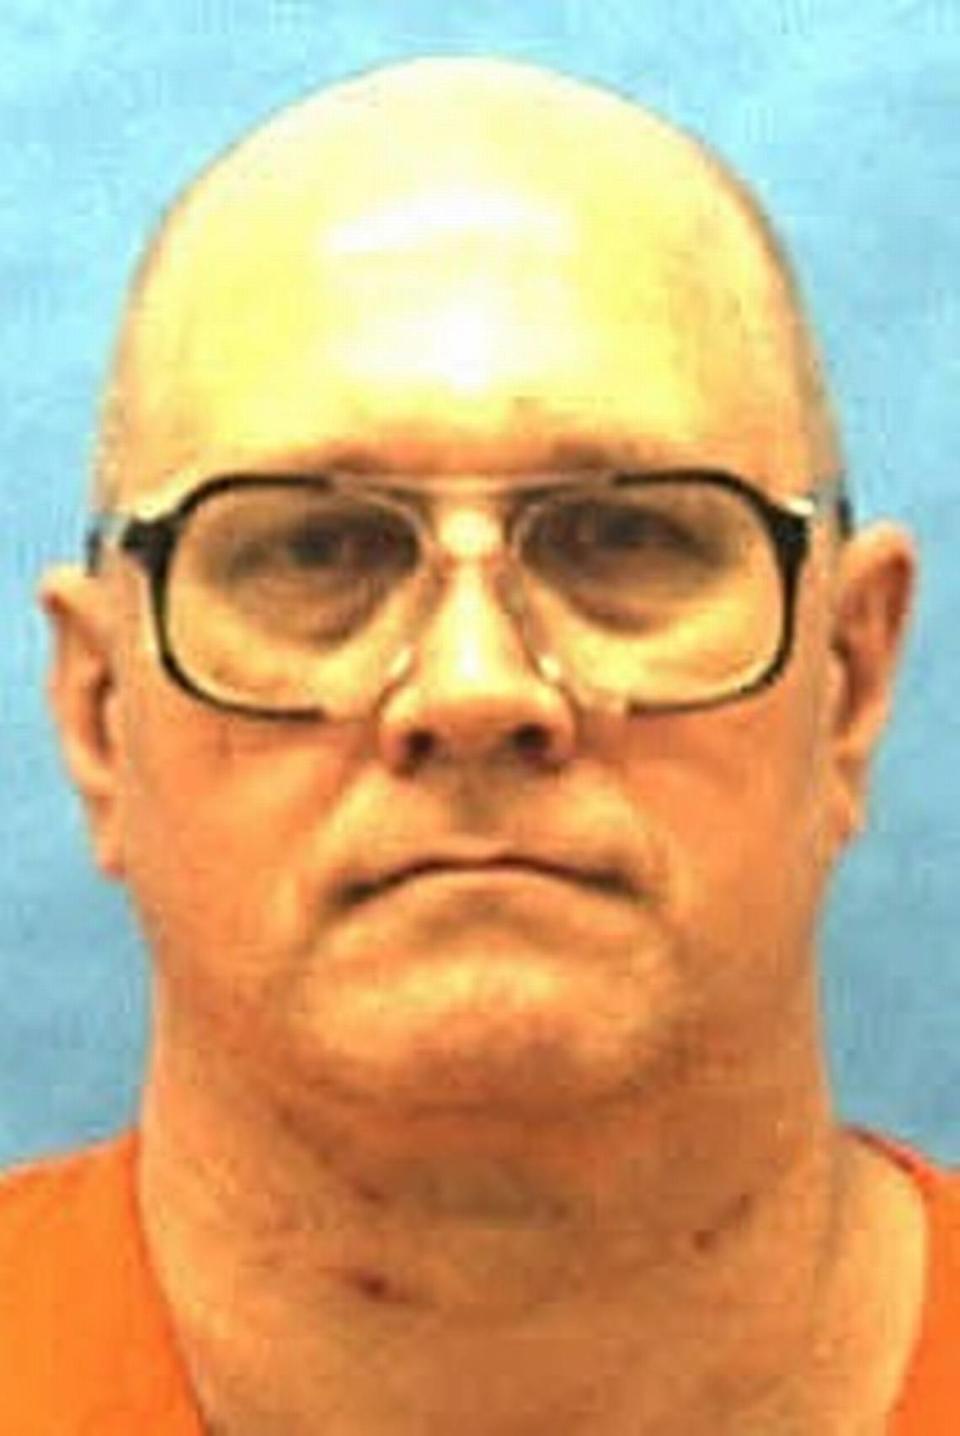 Death Row inmate Thomas Overton was nabbed for the murders due to his moonlighting career as a burglar.